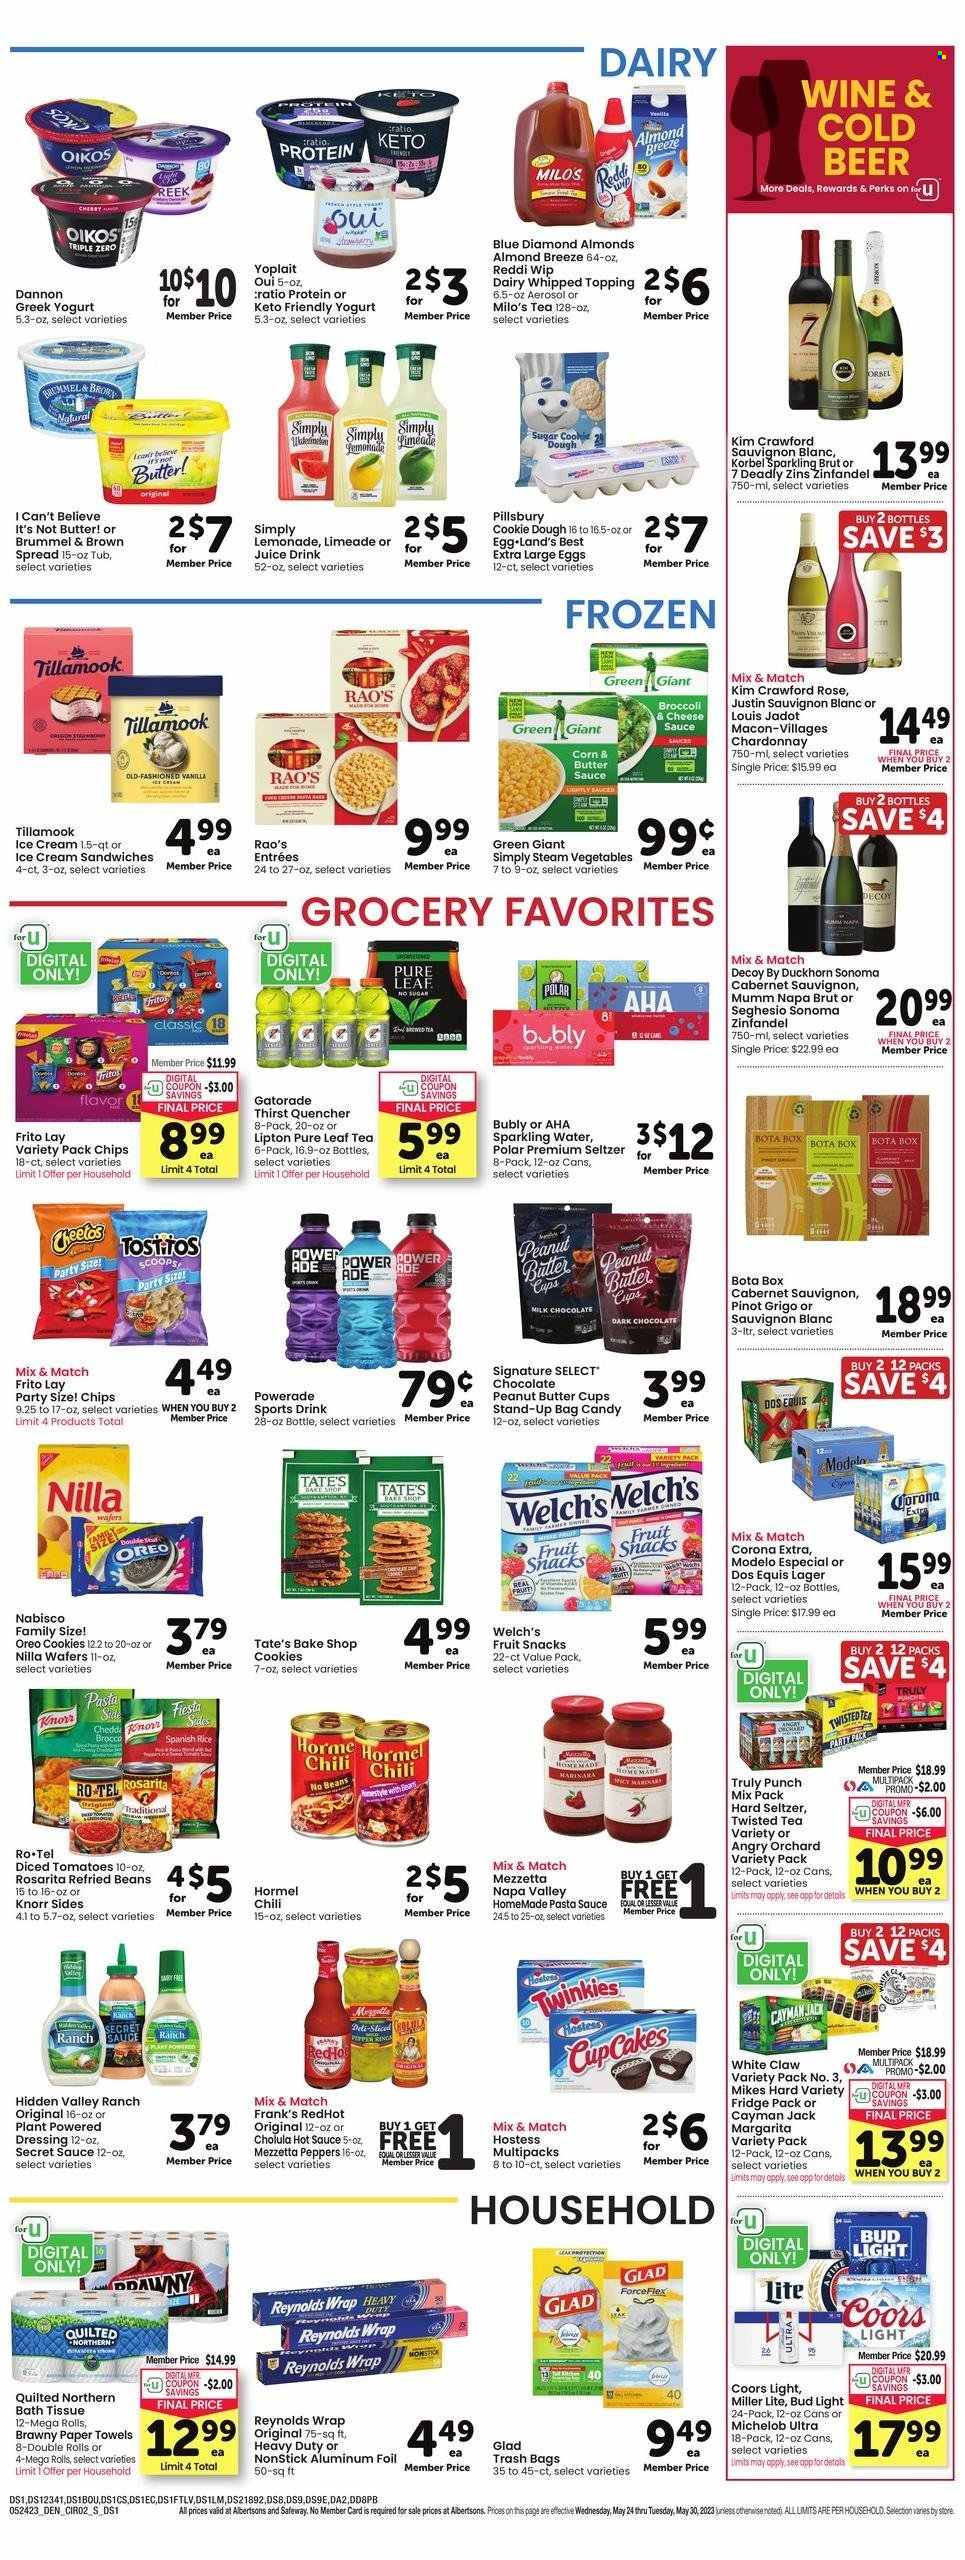 thumbnail - Safeway Flyer - 05/24/2023 - 05/30/2023 - Sales products - cupcake, beans, broccoli, corn, peppers, Welch's, pasta sauce, Knorr, sauce, Pillsbury, Hormel, ready meal, greek yoghurt, Oreo, Oikos, Yoplait, Dannon, Almond Breeze, large eggs, I Can't Believe It's Not Butter, ice cream, ice cream sandwich, cookies, milk chocolate, wafers, dark chocolate, peanut butter cups, fruit snack, Candy, Nabisco, Cheetos, salty snack, topping, refried beans, diced tomatoes, rice, hot sauce, dressing, Blue Diamond, lemonade, Powerade, juice, Fanta, energy drink, Lipton, ice tea, Milo's, Gatorade, sparkling water, water, Pure Leaf, Cabernet Sauvignon, red wine, sparkling wine, white wine, Chardonnay, wine, alcohol, Sauvignon Blanc, Kim Crawford, punch, White Claw, Hard Seltzer, TRULY, beer, Bud Light, Corona Extra, Lager, Modelo, bath tissue, Quilted Northern, kitchen towels, paper towels, bag, trash bags, aluminium foil, electrolyte drink, Miller Lite, Coors, Dos Equis, Twisted Tea, Michelob. Page 2.